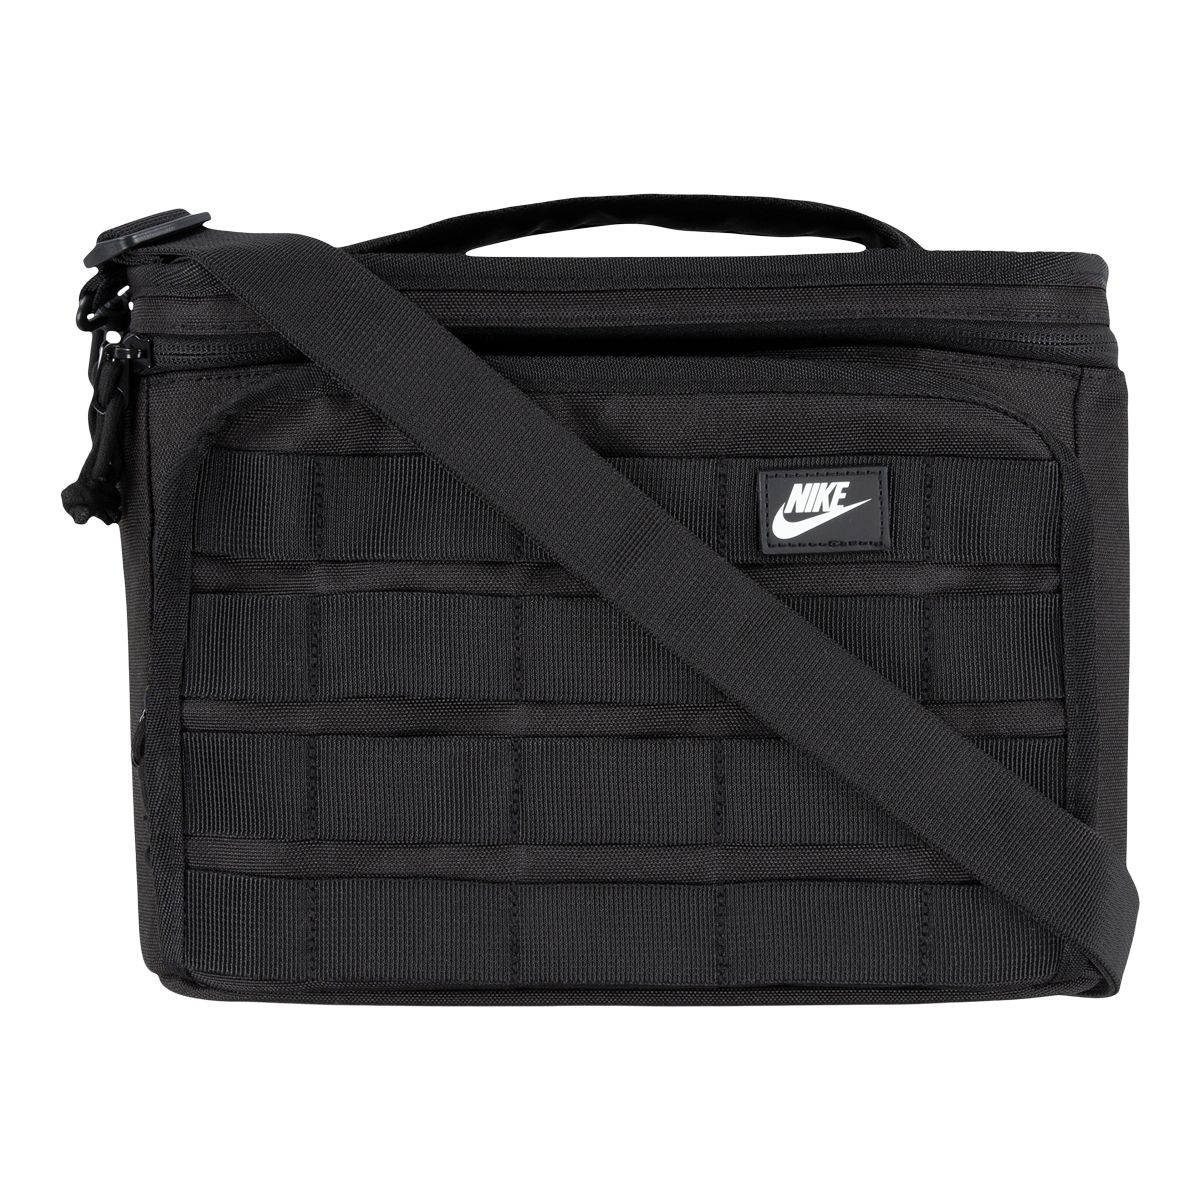 Nike Reflect Lunch Tote